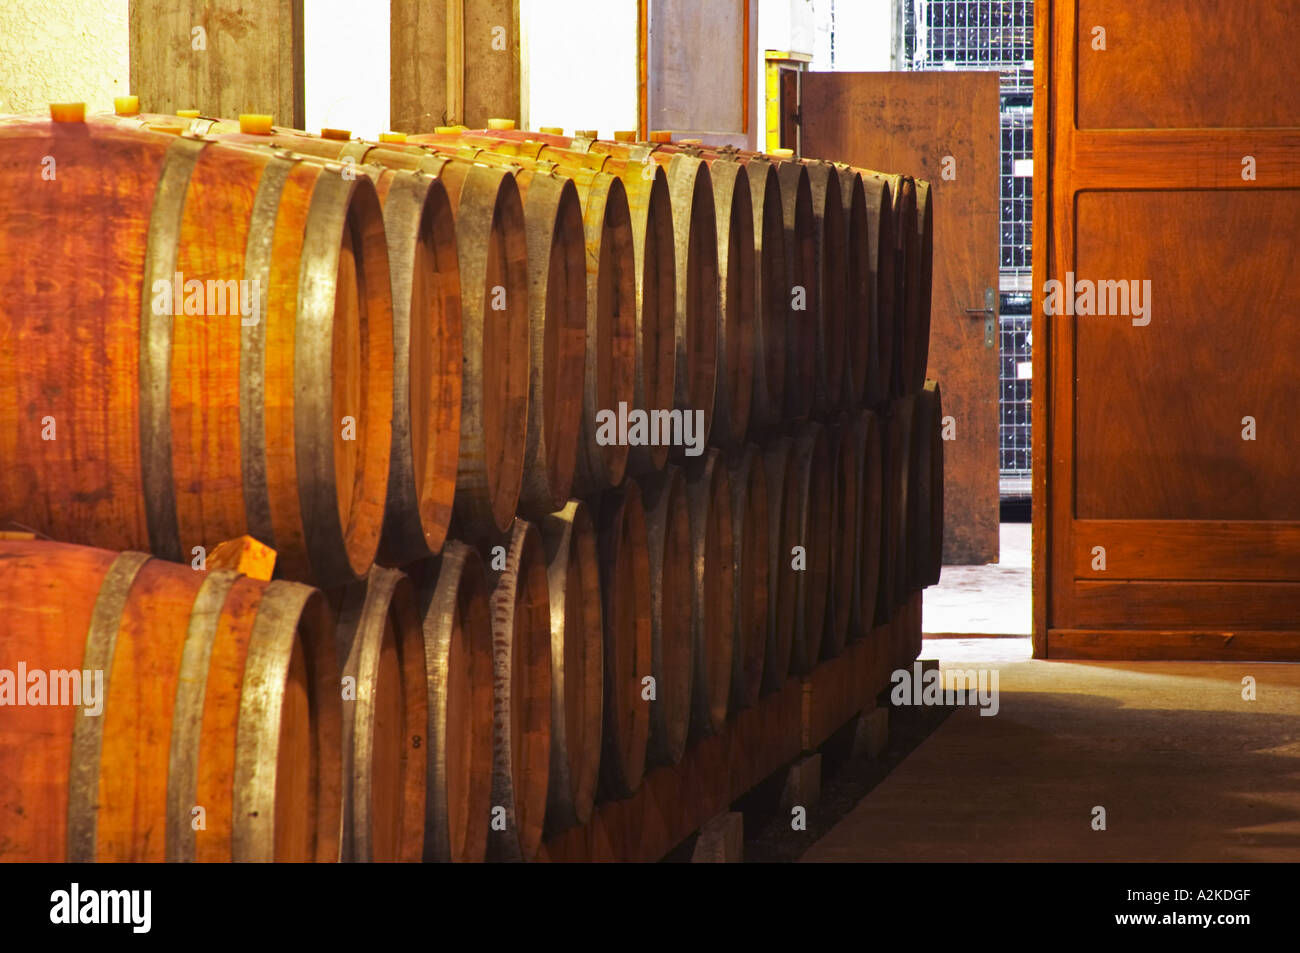 Oak barrels for aging wine in the wine cellar. Domaine Yves Cuilleron, Chavanay, Ampuis, Rhone, France, Europe Stock Photo